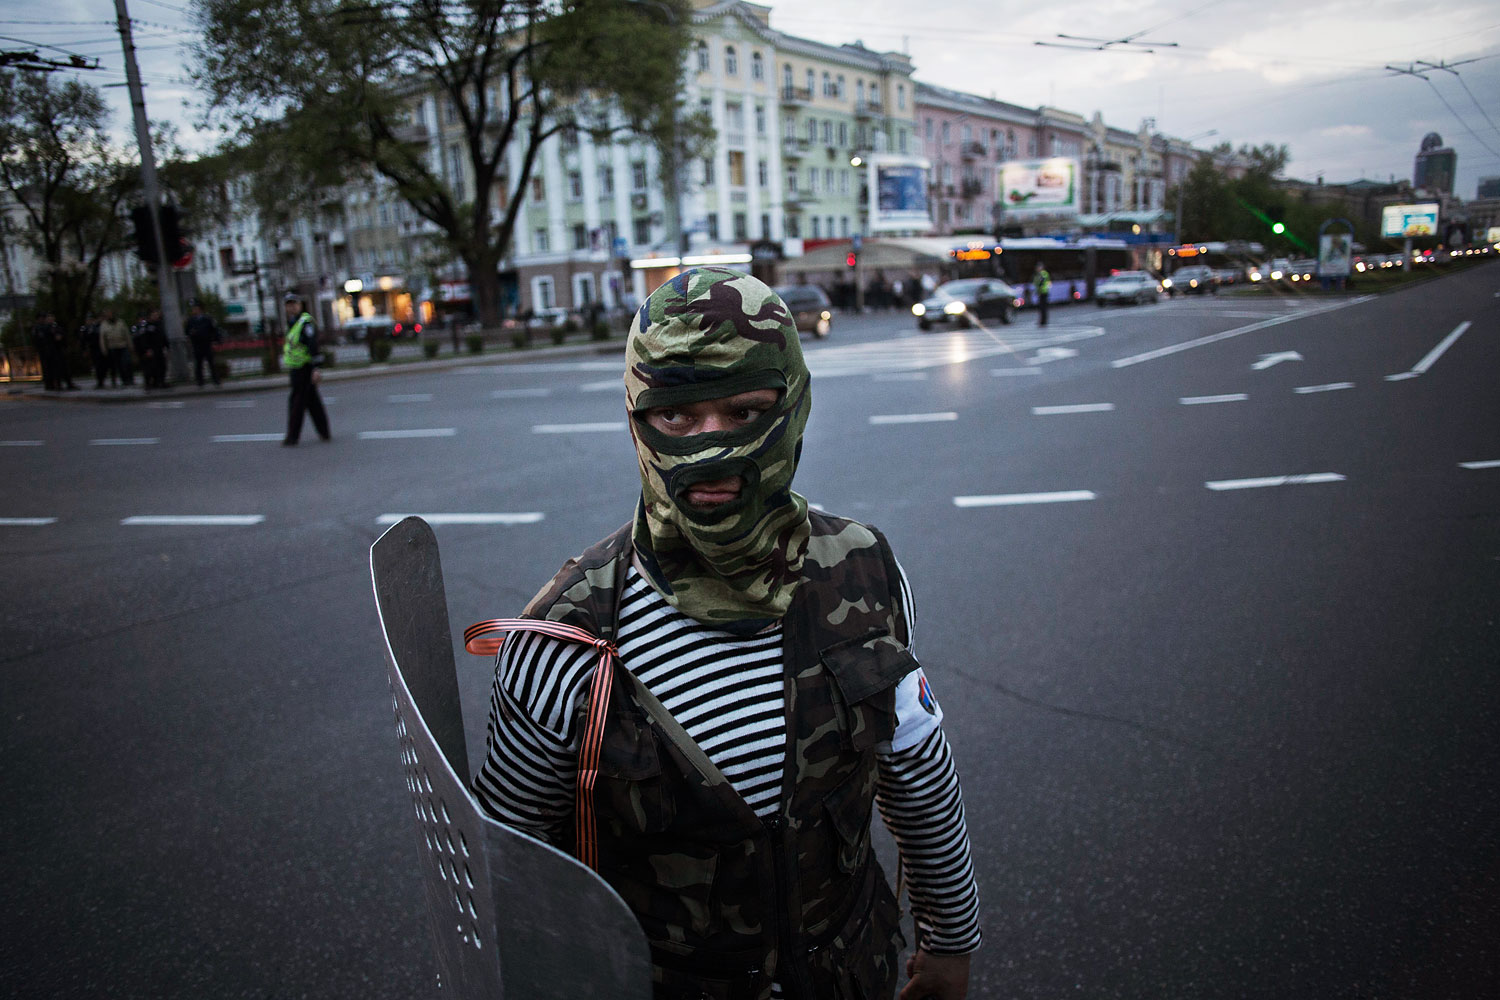 A pro-Russian activist holds a shield after clashing with pro-Ukrainians during a pro-Ukraine rally in Donetsk, Ukraine, on Monday, April 28, 2014 (Manu Brabo&mdash;AP)